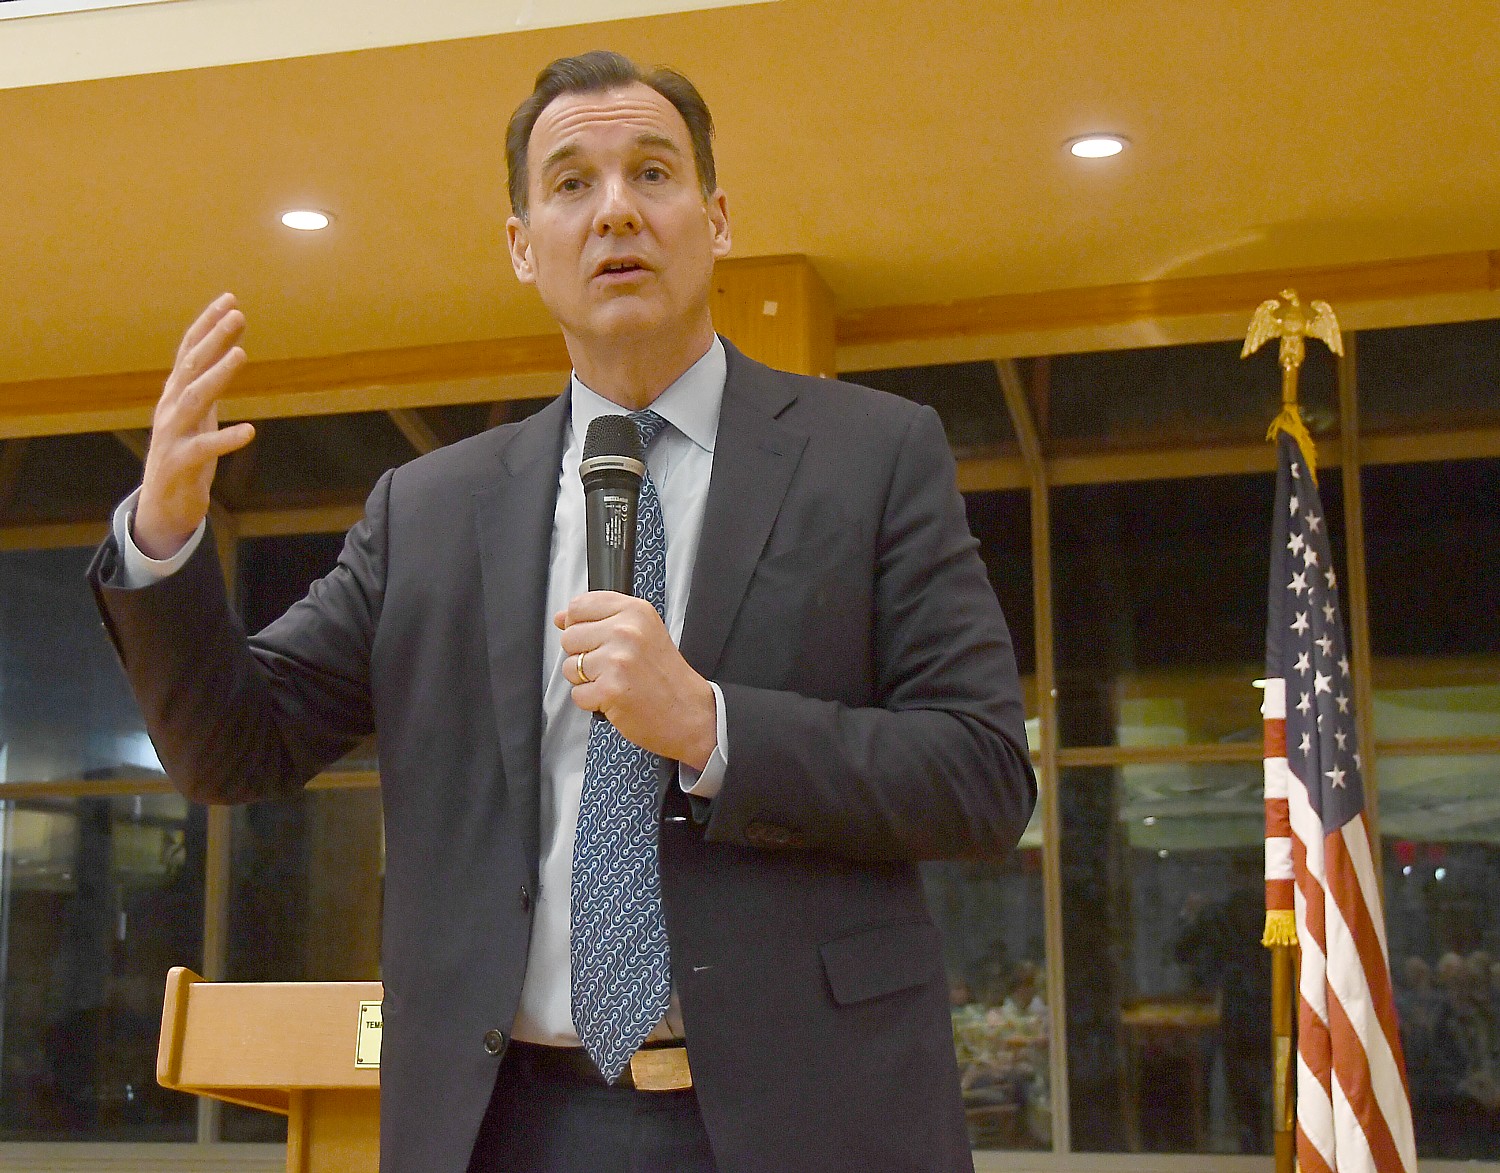 Rep. Tom Suozzi attended a town hall at Temple Beth-El in Great Neck on Monday night, discussing a wide range of issues. (Photo by Karen Rubin/news-photos-features.com)